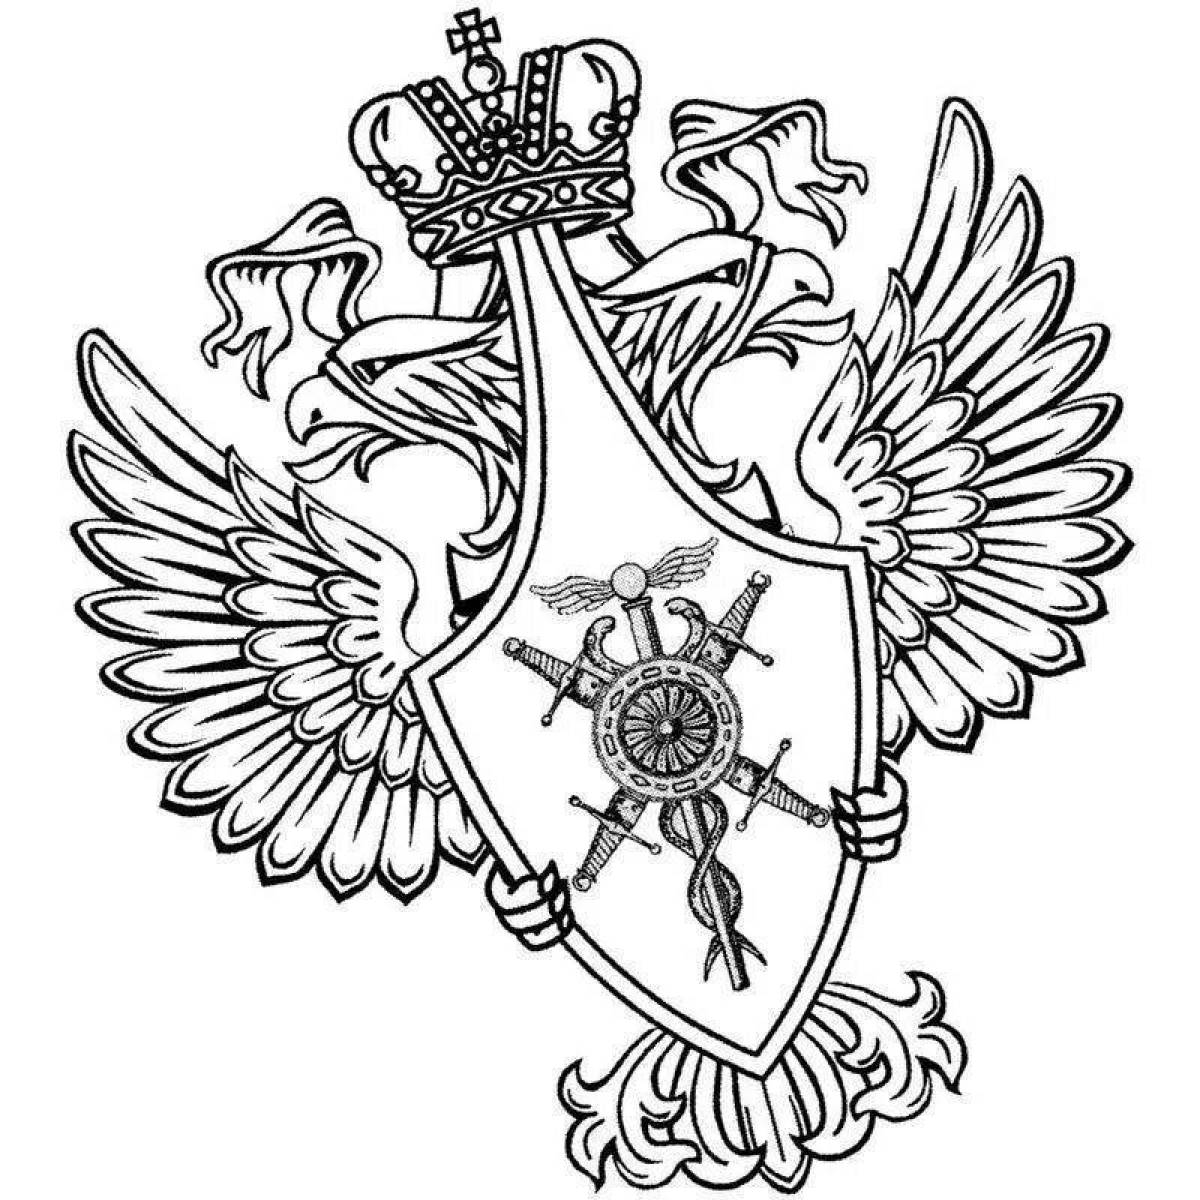 Grand flag and coat of arms of Russia